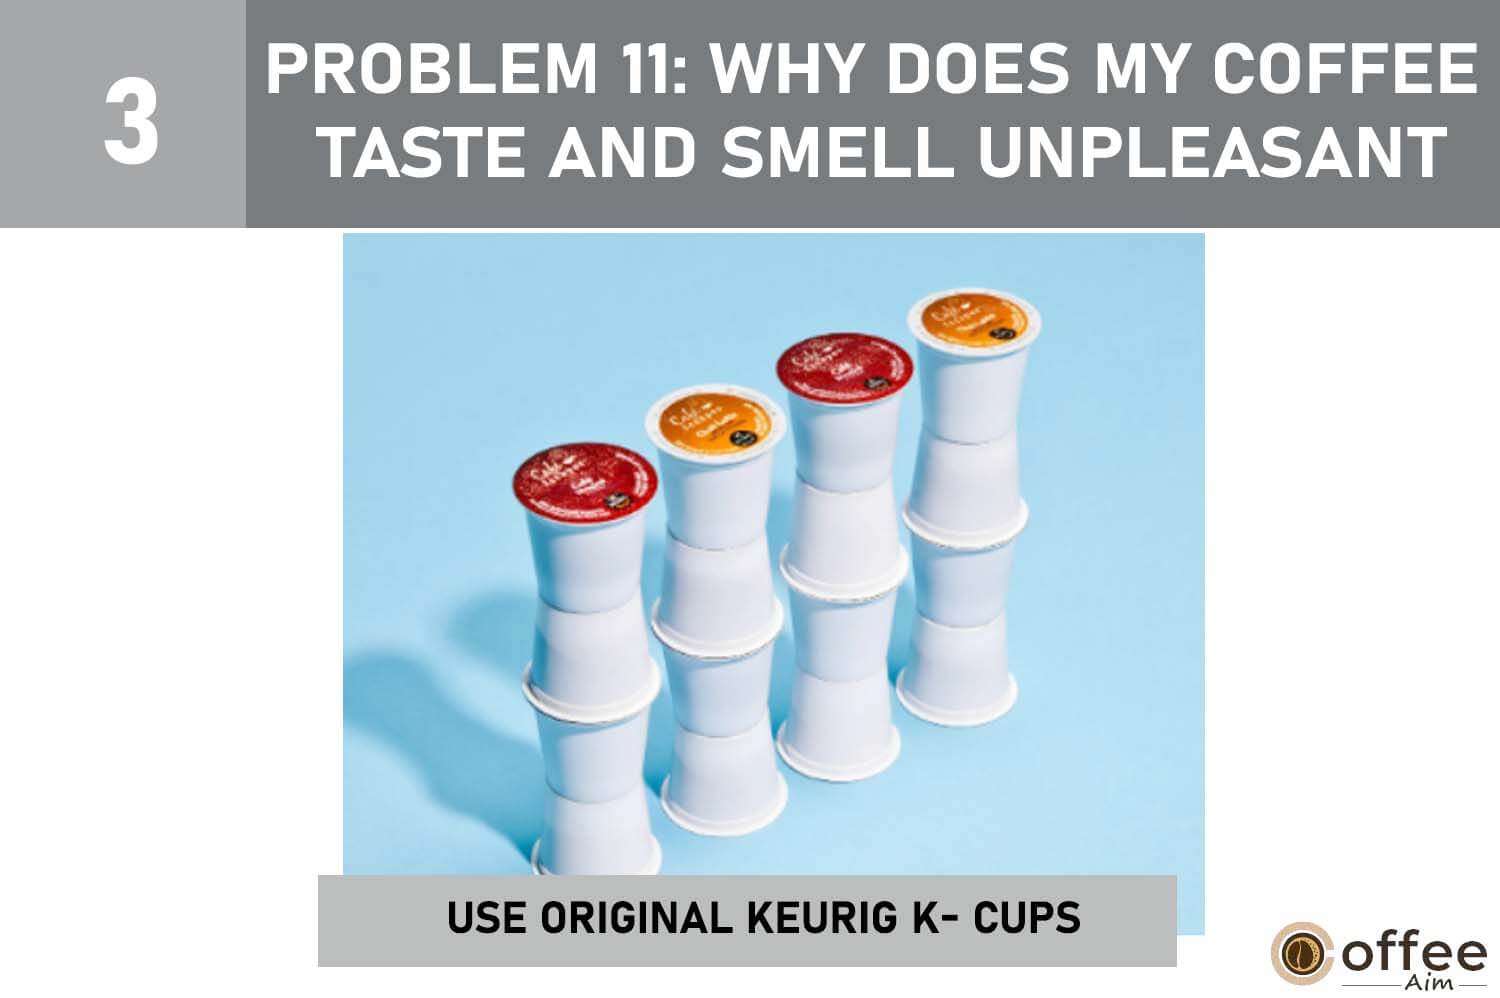 This image provides information about using original Keurig K-Cups for Problem 11 in our article "Keurig K-Mini Plus Problems."

